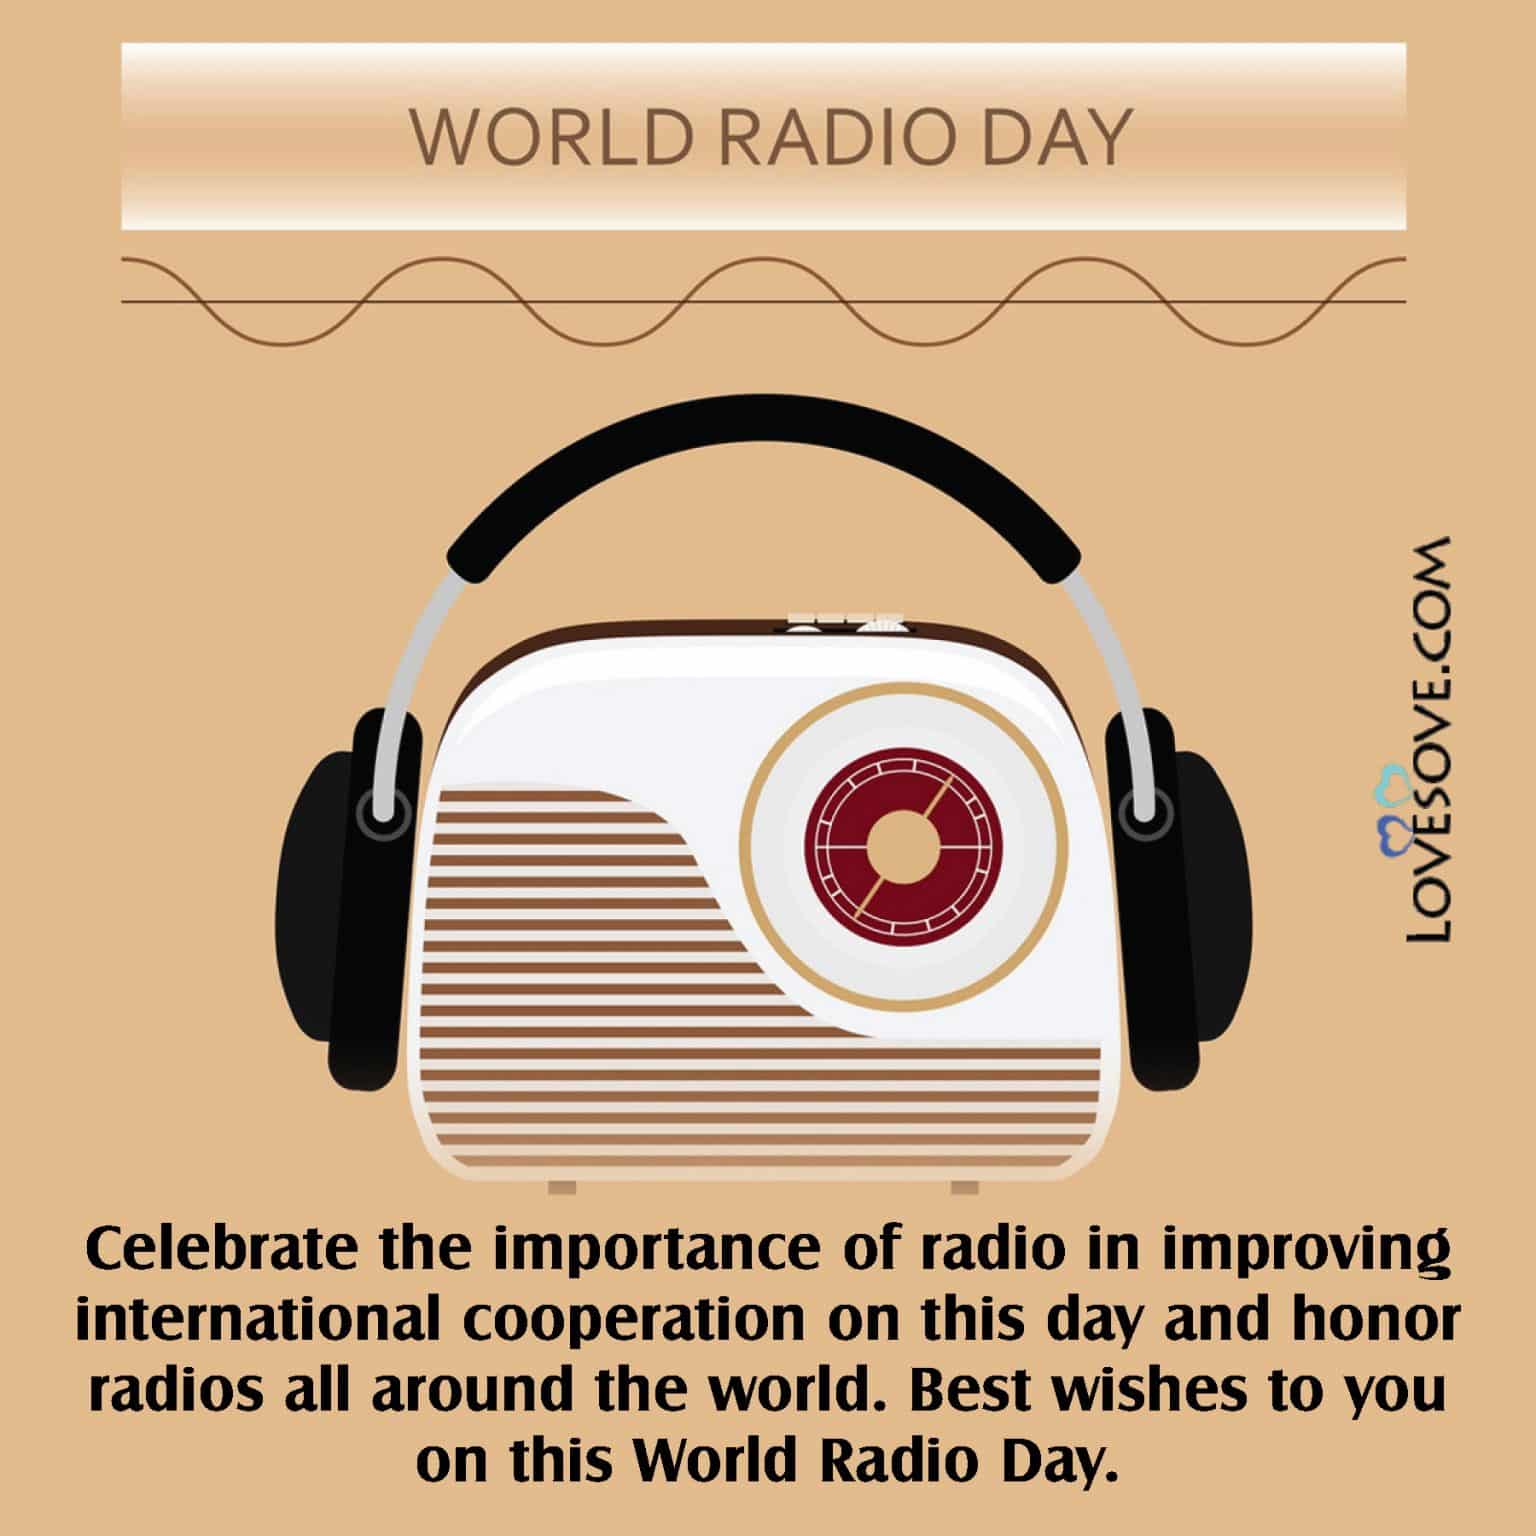 World Radio Day Quotes, Messages, Thoughts, Wishes & Images SHAYARI WORLD